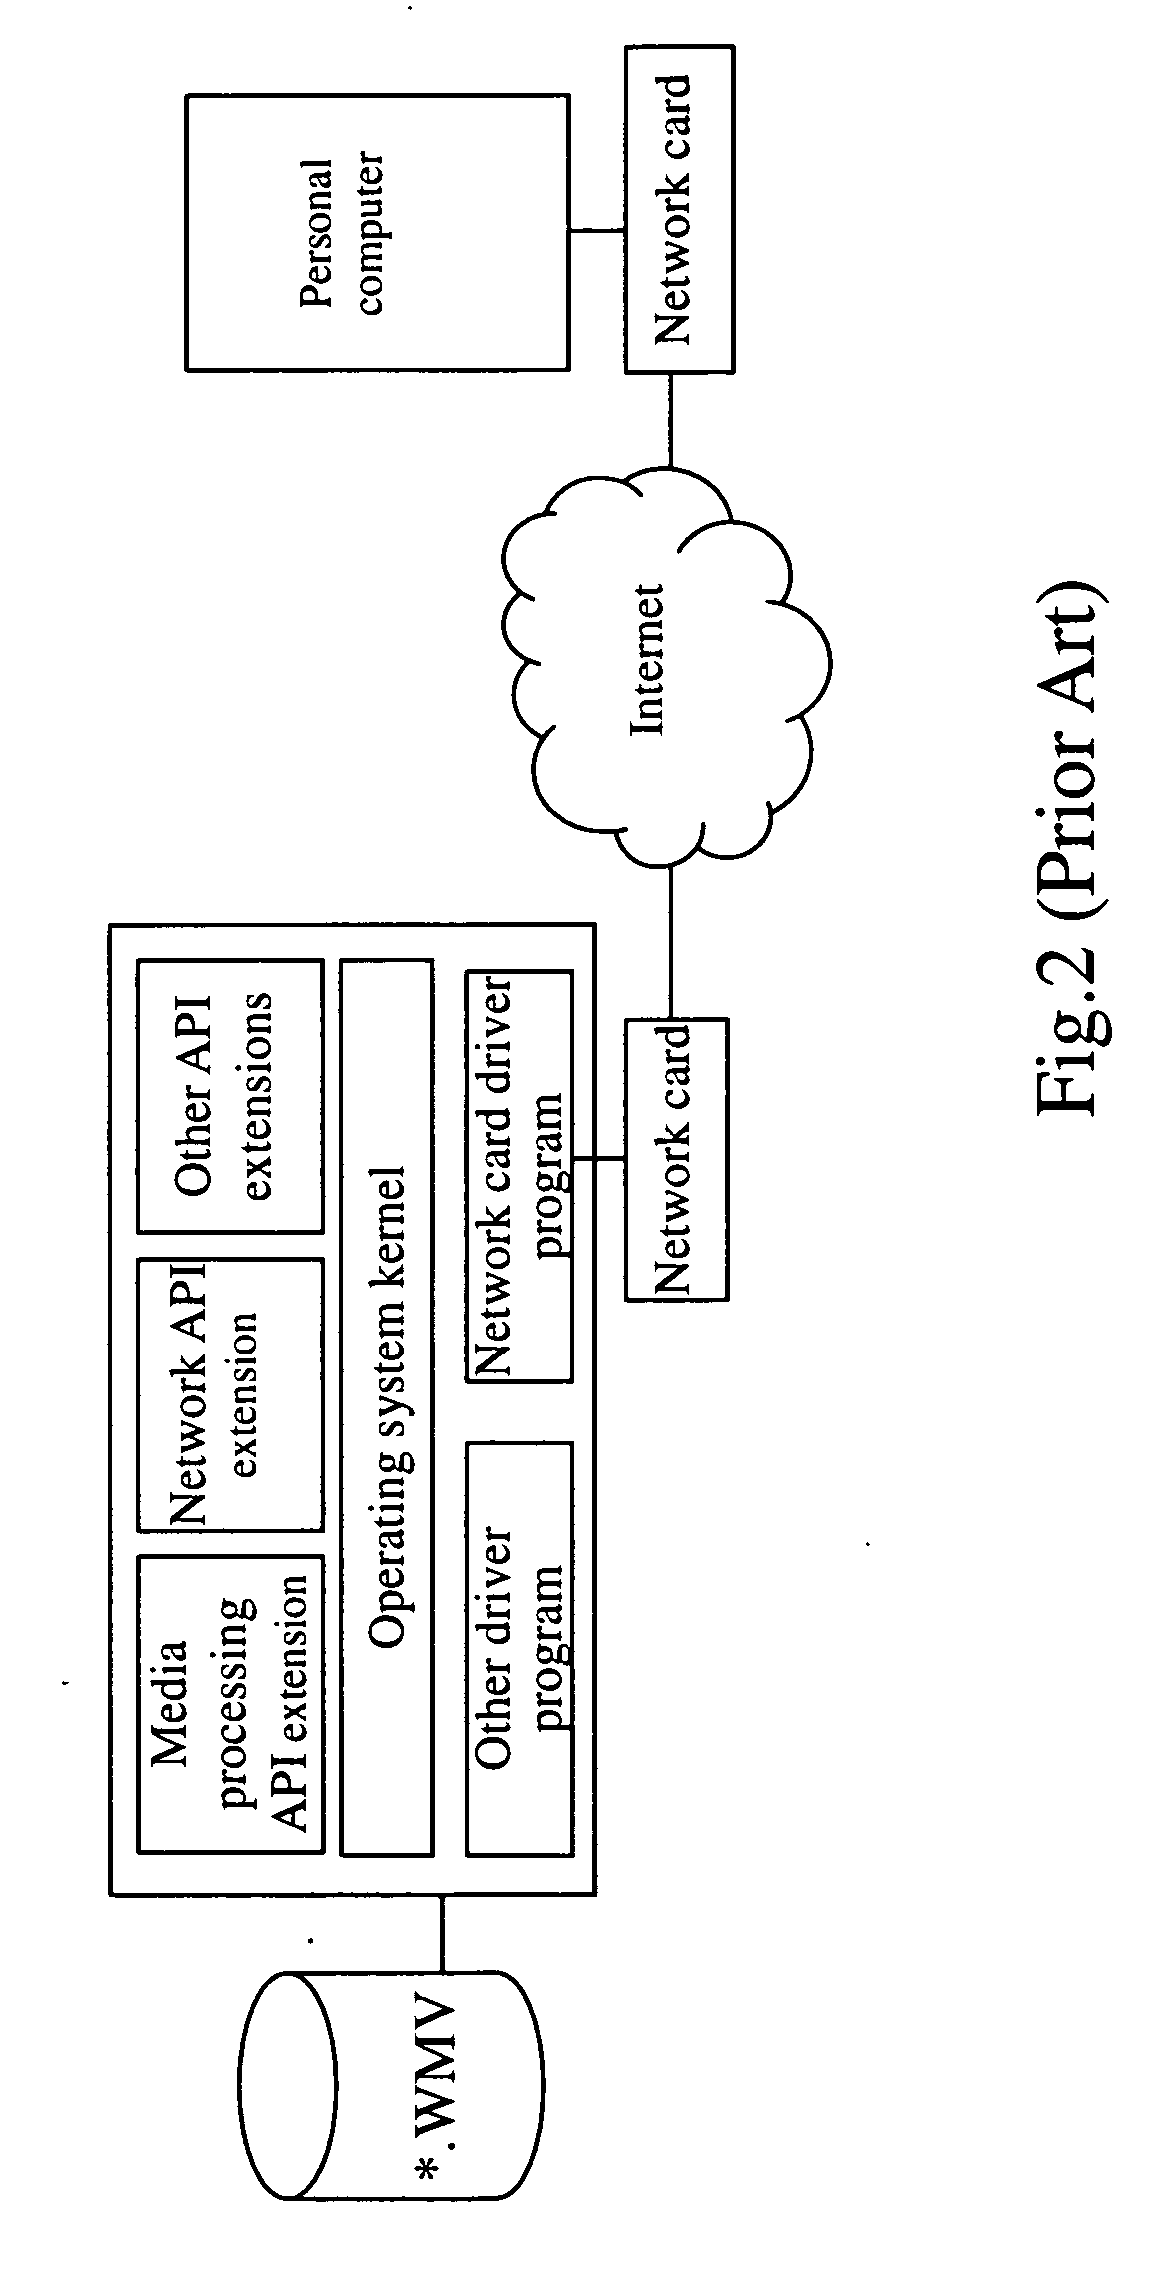 Personal multimedia on-line broadcasting system and method thereof